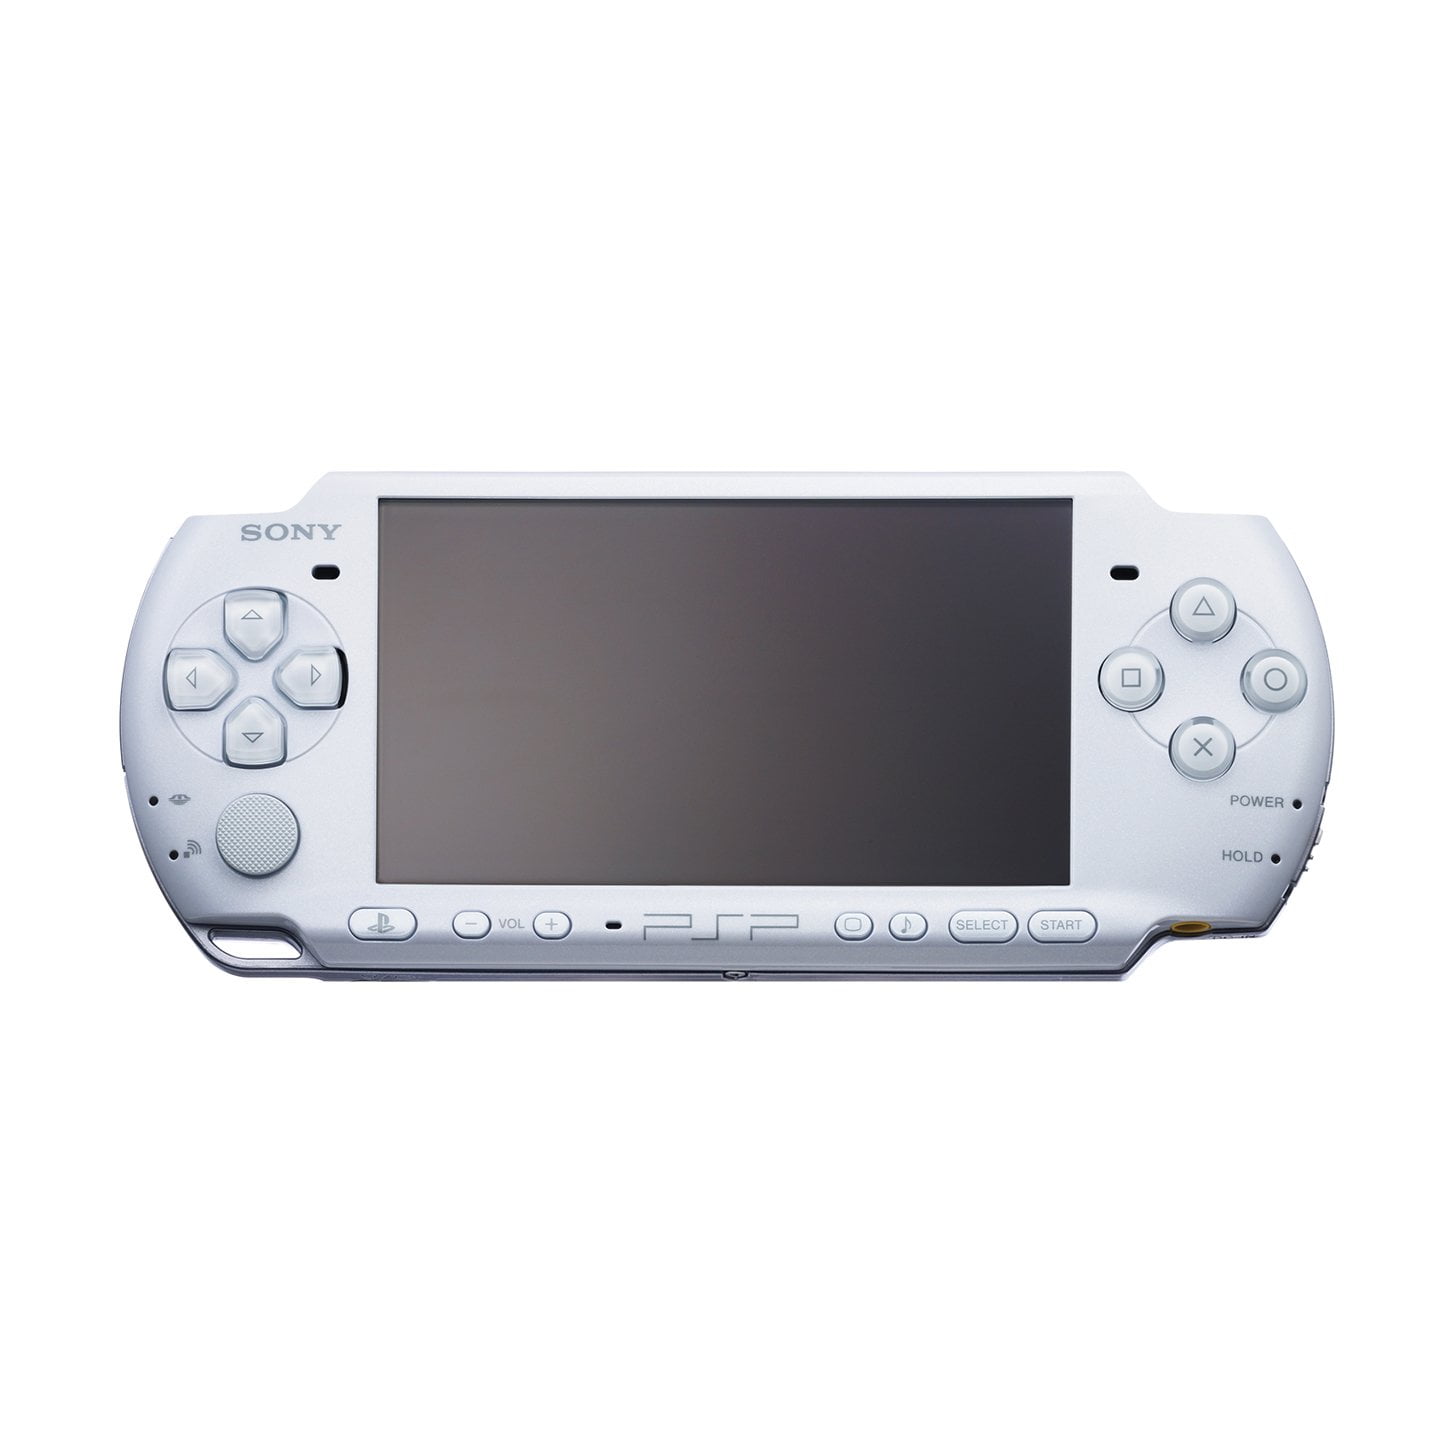 New Sony Playstation Portable PSP 3000 Series Handheld Gaming Console  System (Renewed) (Spirited Green)